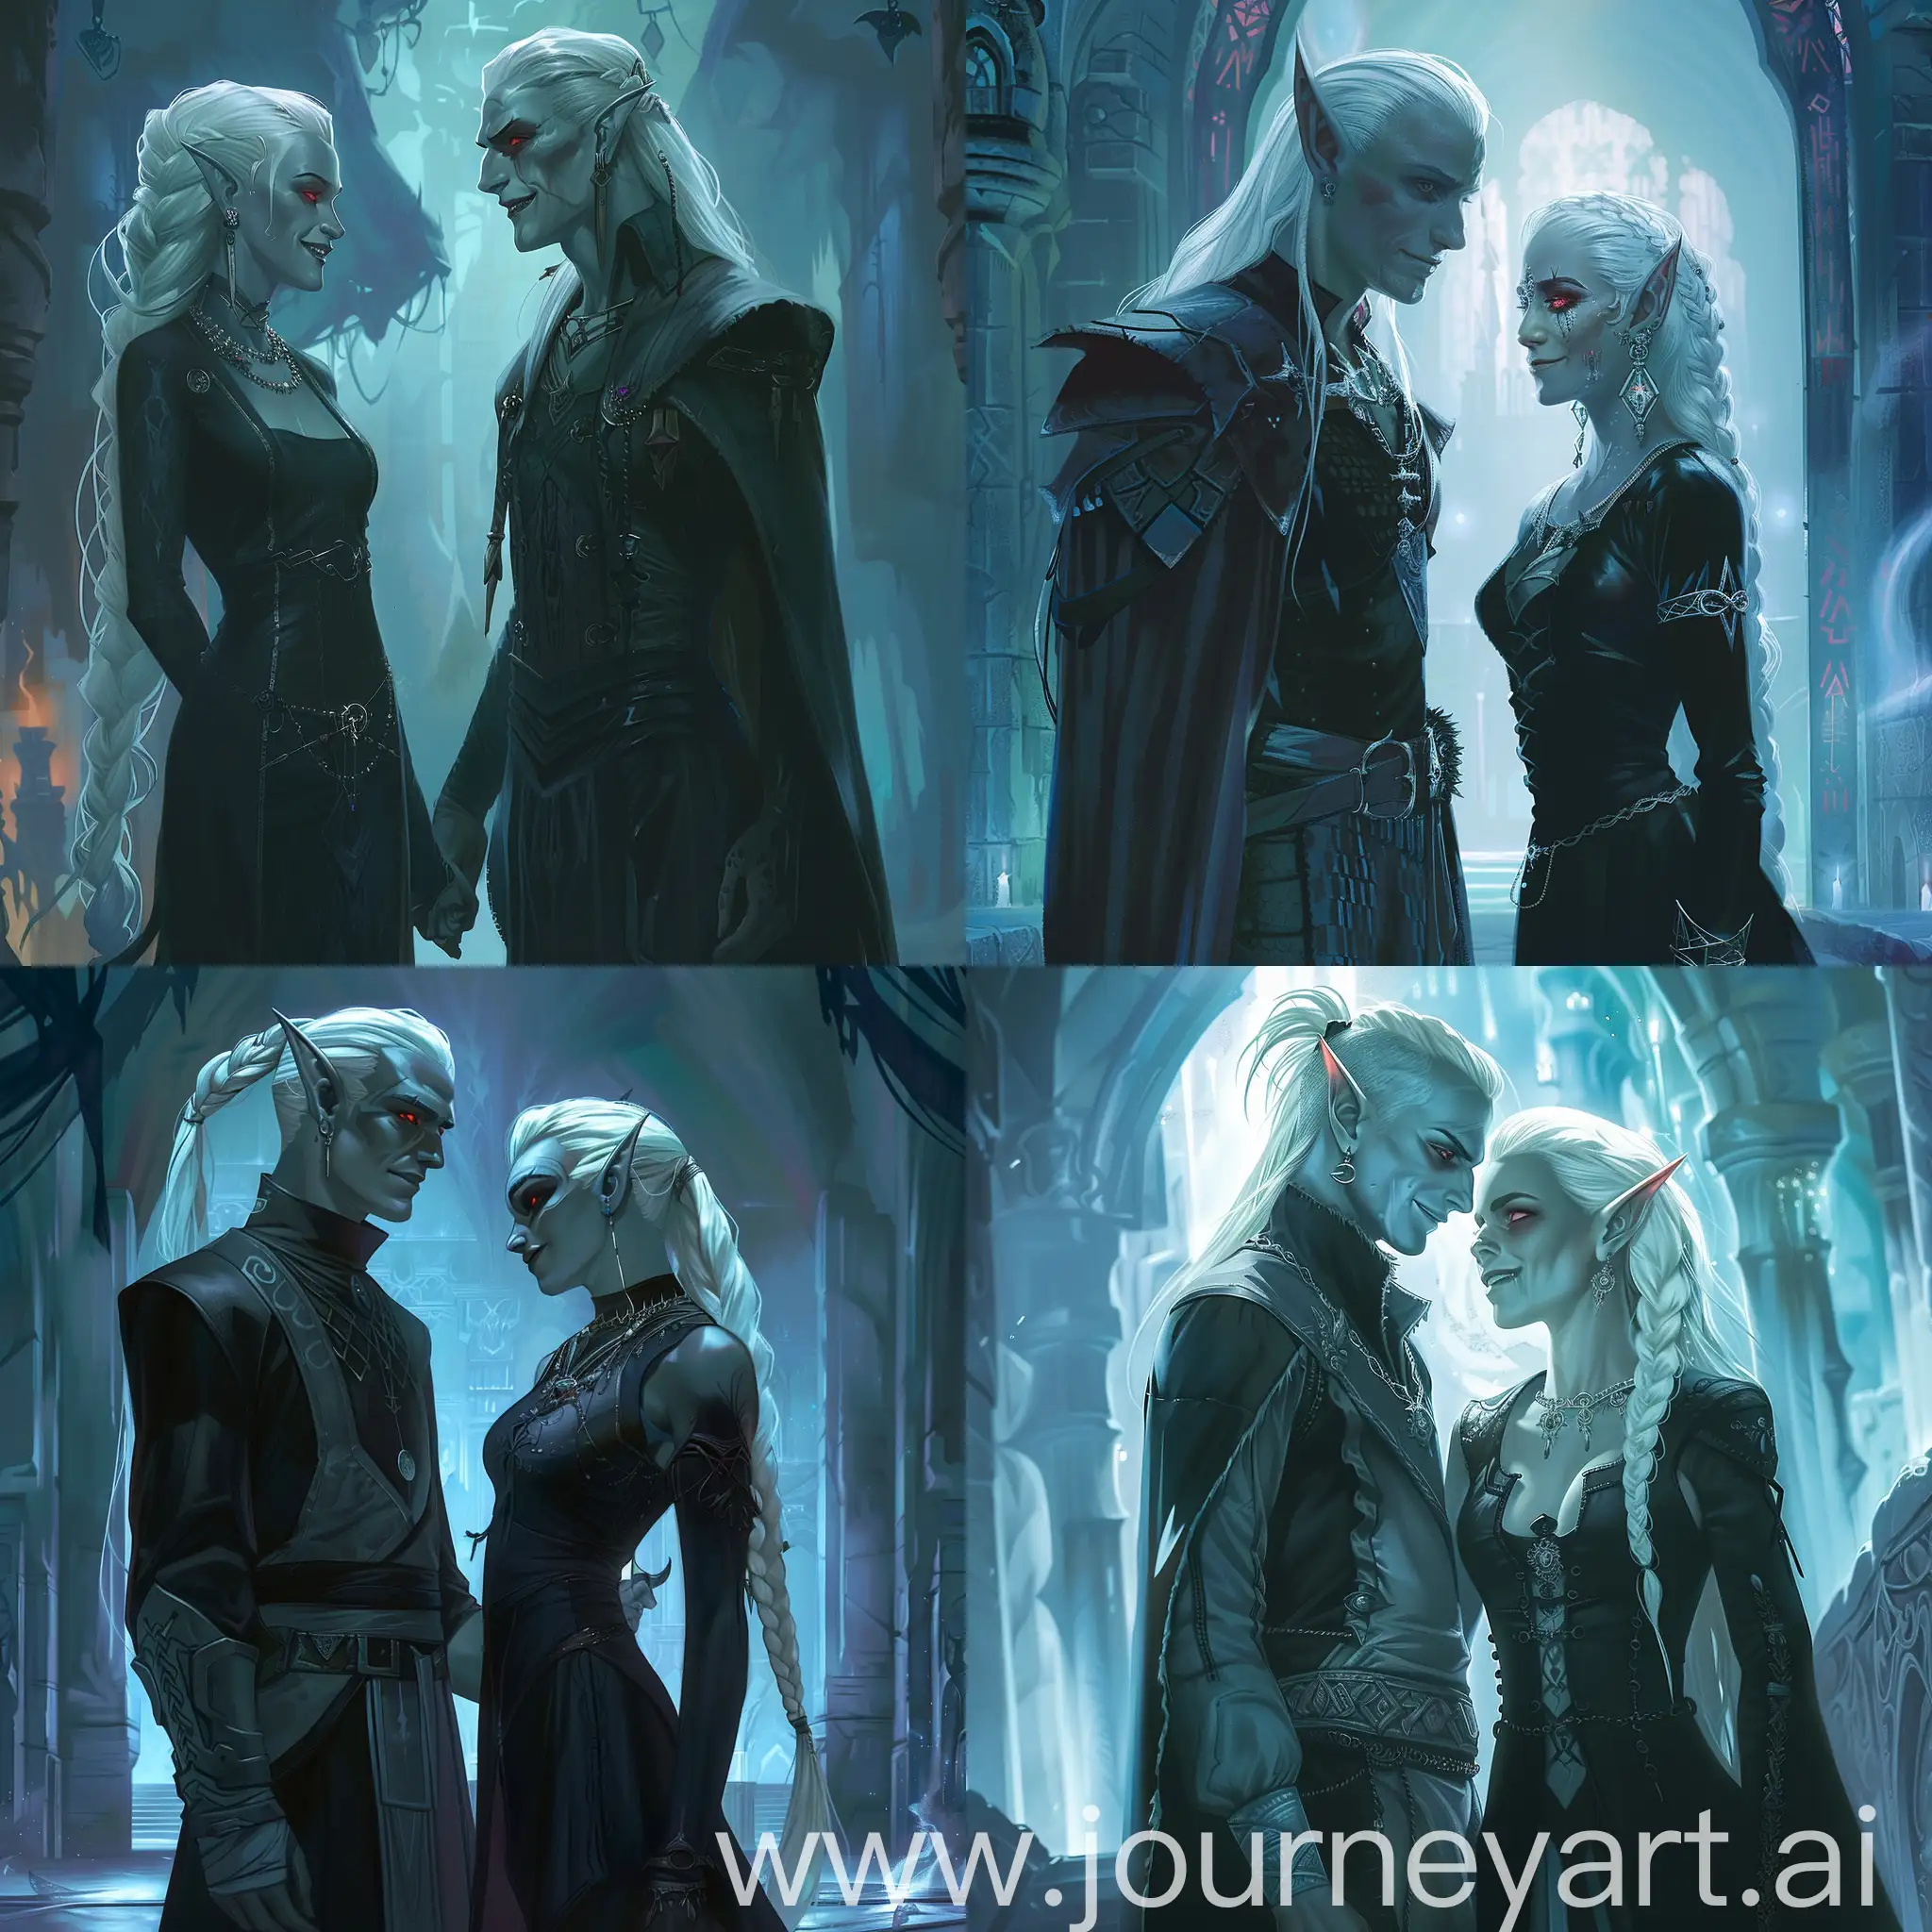 Draw a characters from the Dungeons and Dragons universe according to the following description: Two people stand and look at each other, sideways to the viewer. Drow man and woman. He is a handsome drow rogue, dressed in assasin clothes. His swept back white hair is gathered in a long braid, hair is slicked, combed. He has thin face with cheekbones. His face with a calm smile is clean shaven and his eyes have red iris. He have a earrings in long pointed ears. He has grey skin. His demeanor is calm. He stands and looks down at the woman. She has a young beautiful thin face. She looks at the man with her red eyes and smiles. She has   long white hair with braids and jewelry in it. She she wears a long black dress with a black cloak. She has pointy ears and earrings. Against the backdrop of an underground temple illuminated with a magical bluish light